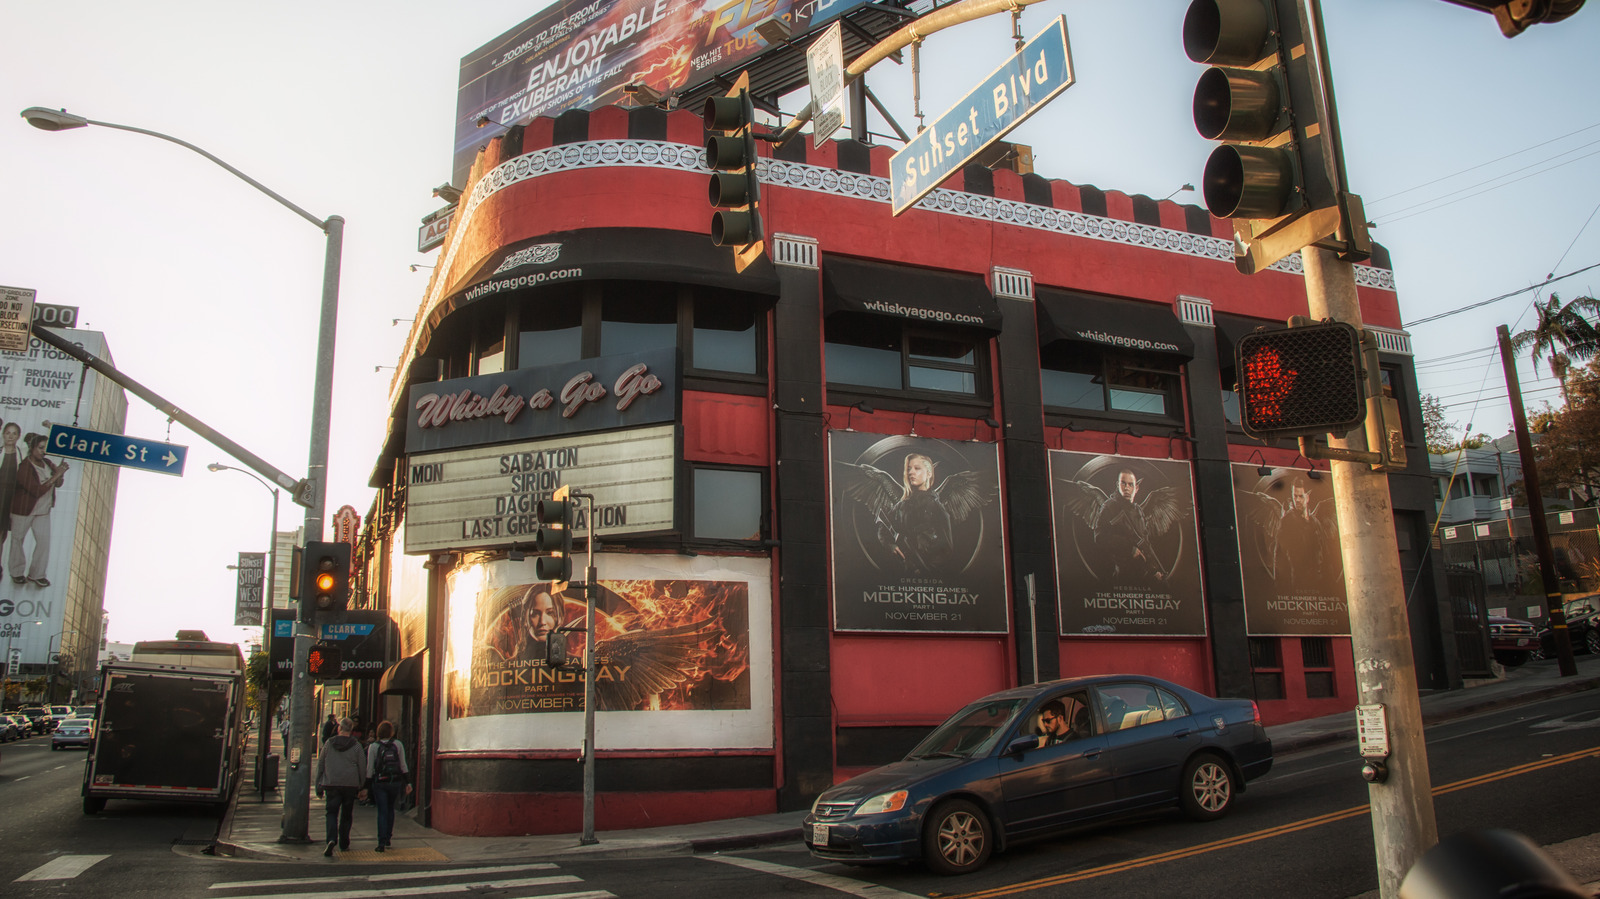 The Criminal History Behind Hollywood's Famous Sunset Strip